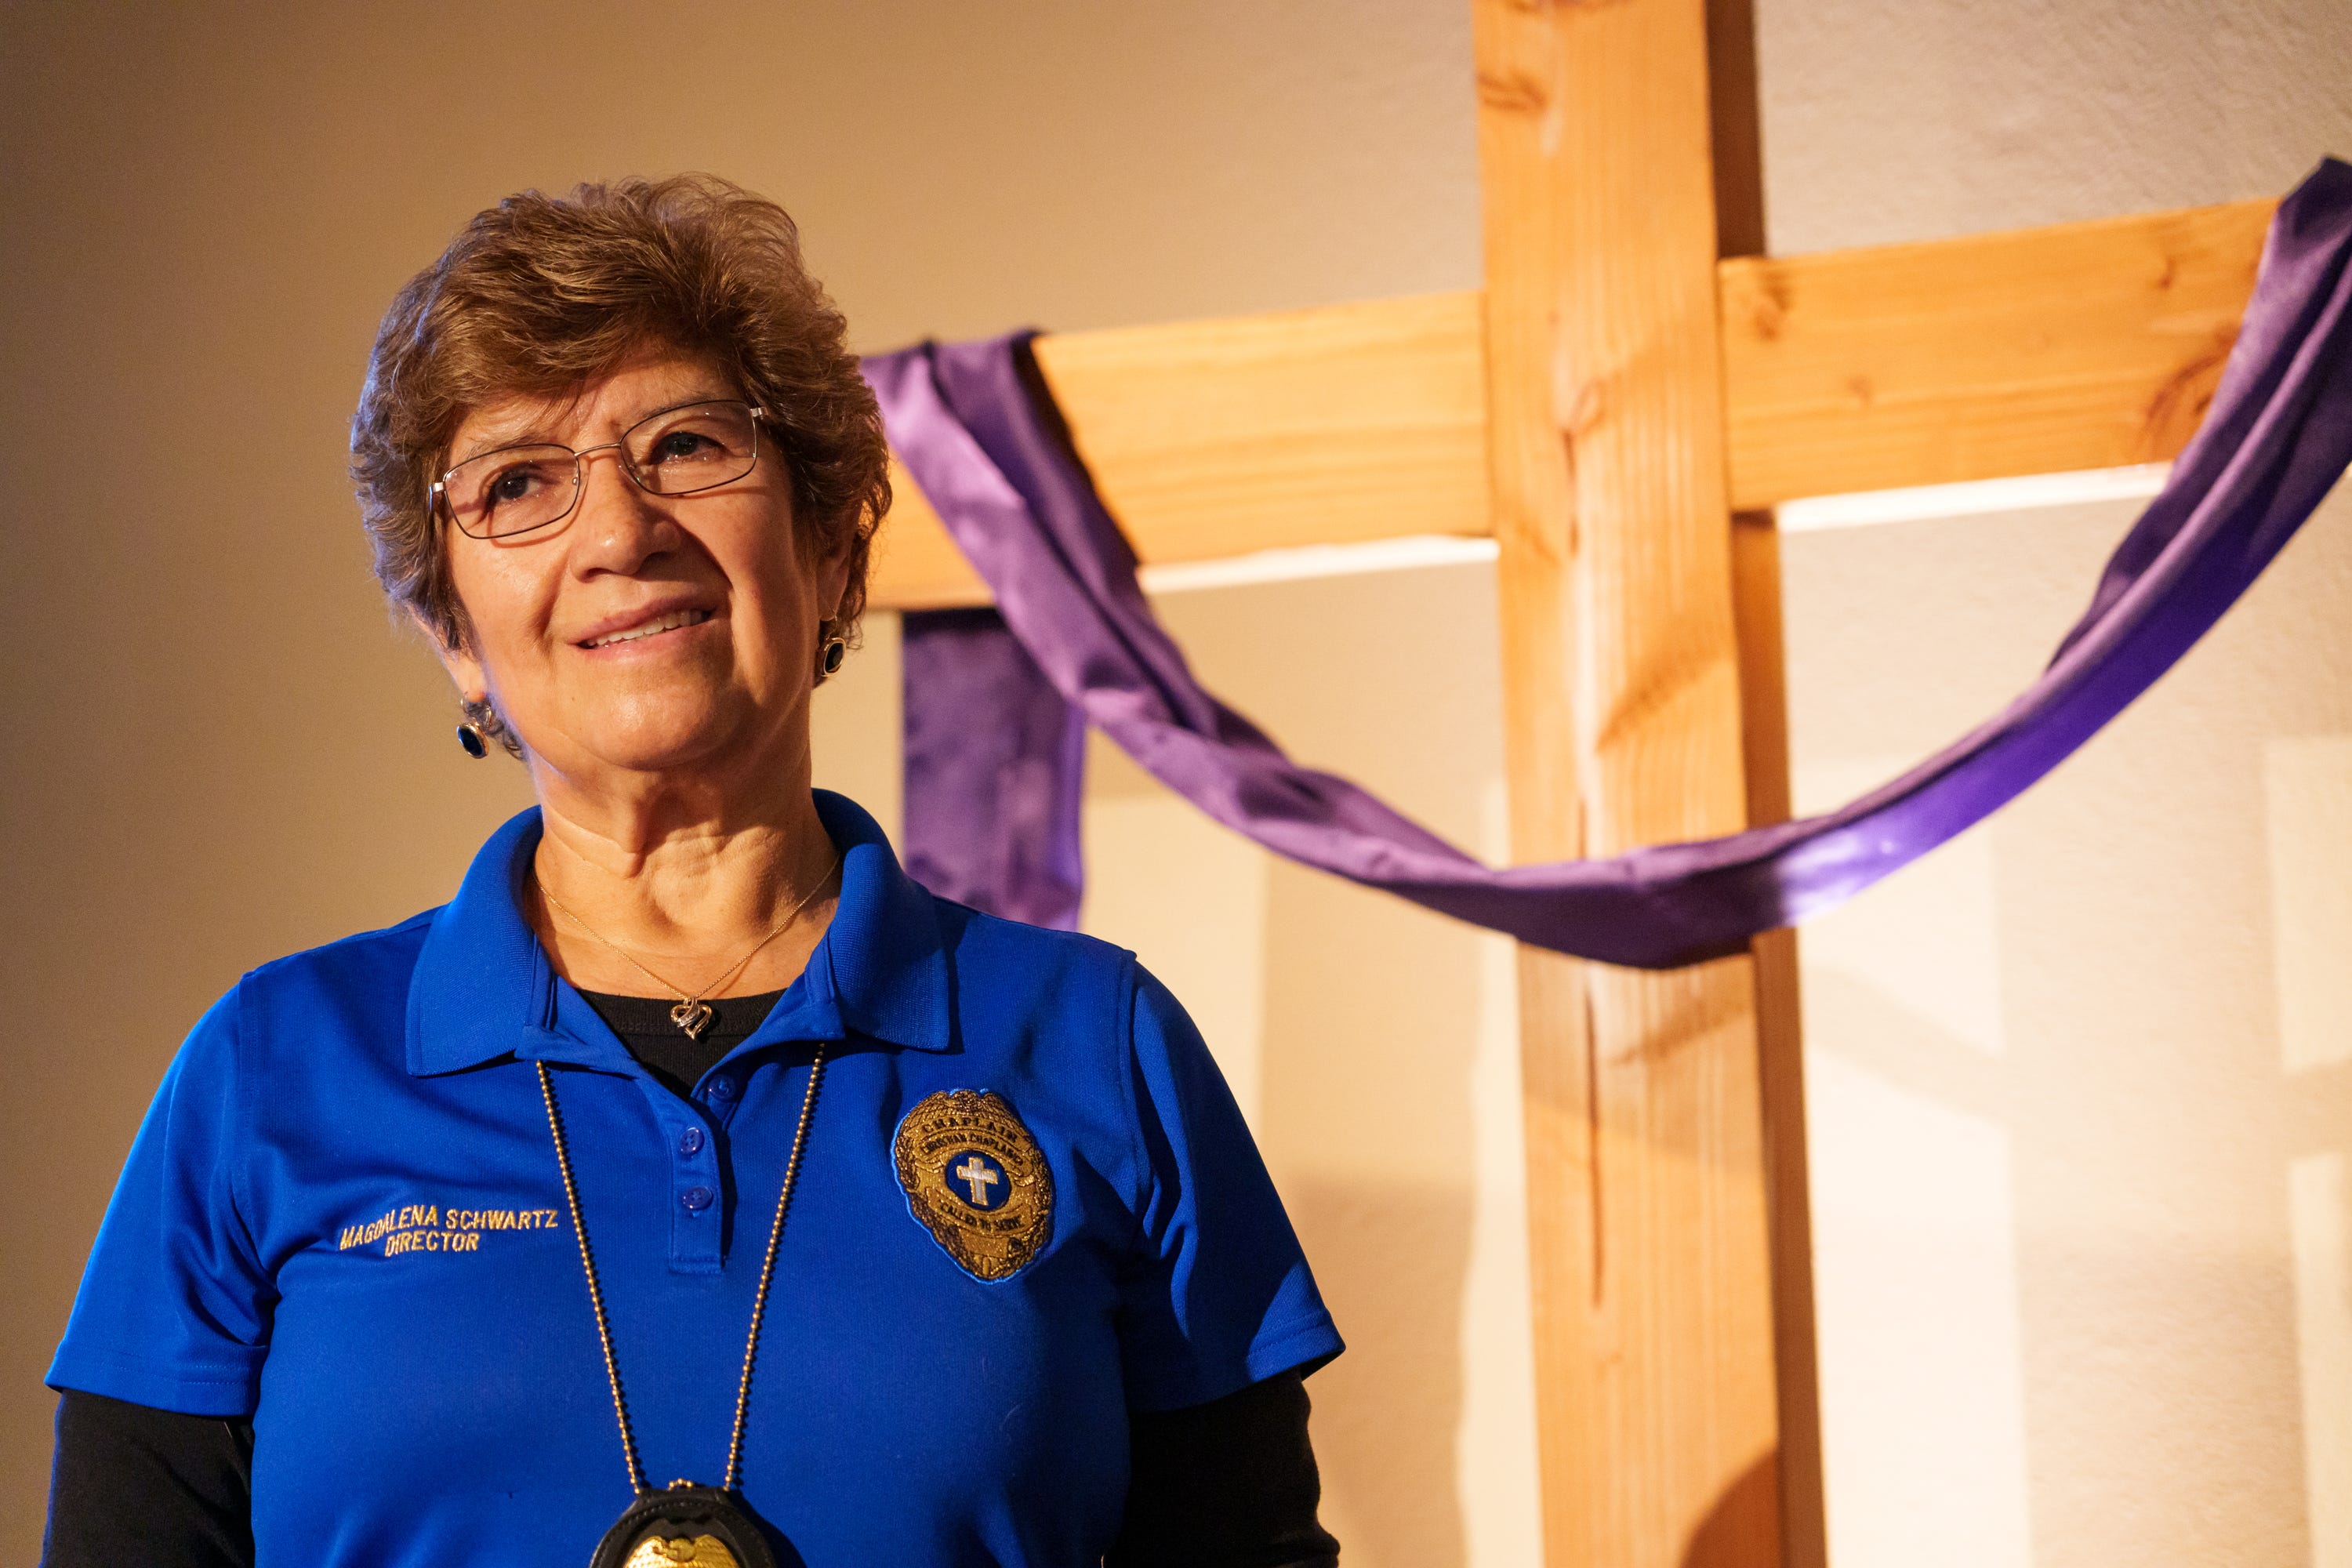 Pastor Magdalena Schwartz poses for a photo at Vineyard Community Church on March 10, 2023, in Gilbert, Ariz.